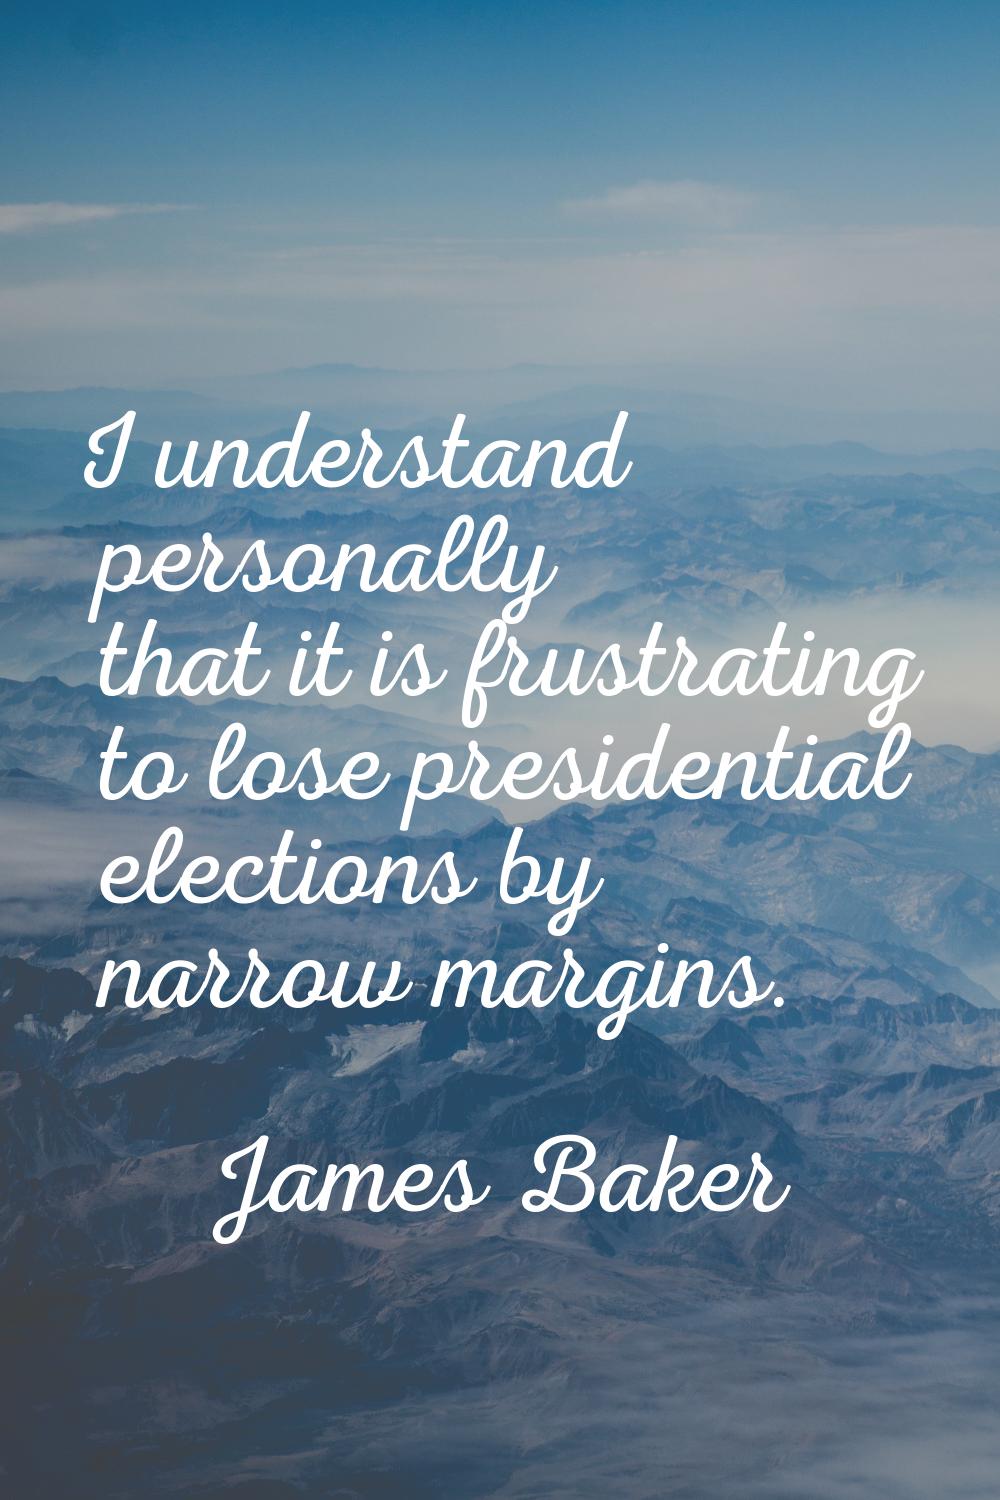 I understand personally that it is frustrating to lose presidential elections by narrow margins.